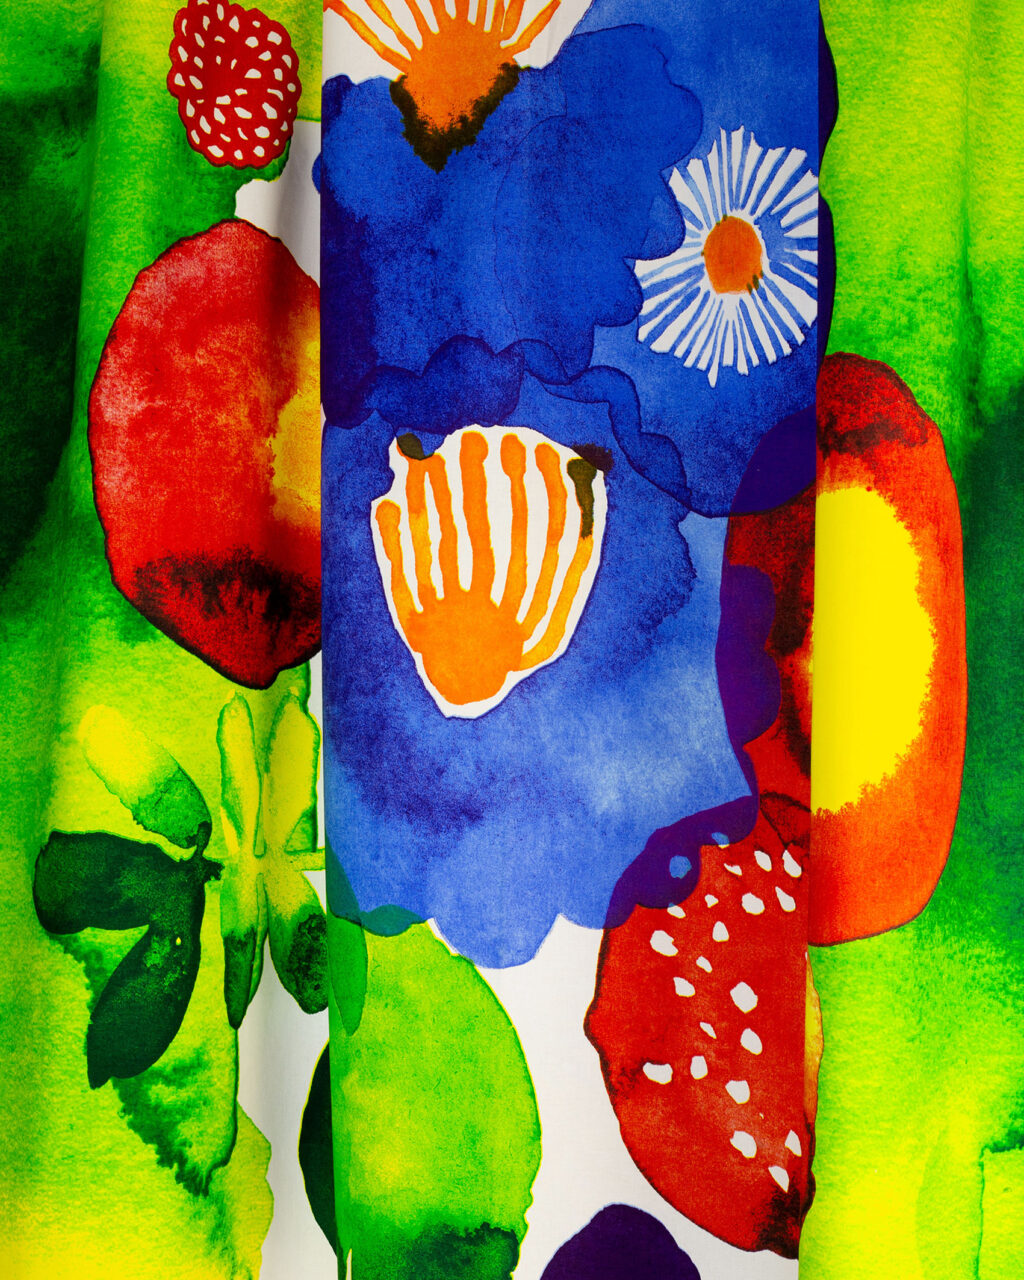 A colorful fabric designed by Aino-Maija Metsola, with, among other things, colorful flowers.